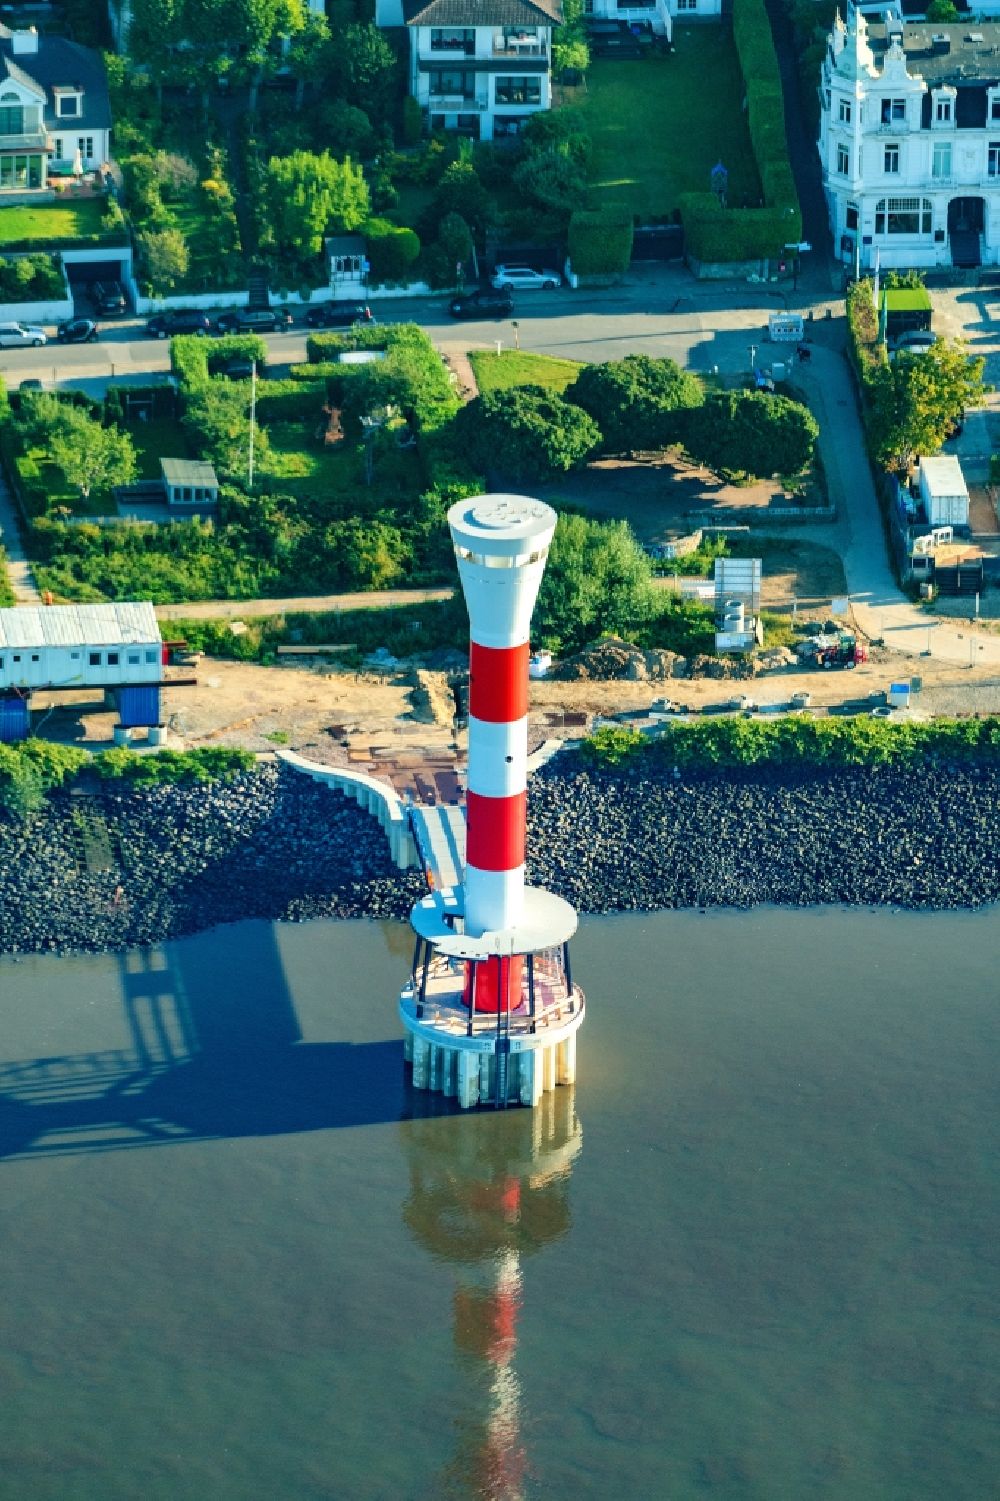 Hamburg from the bird's eye view: Lighthouse as a historic seafaring character in the coastal area of Elbe Leuchtturm Blankenese, Unterfeuer in Hamburg, Germany